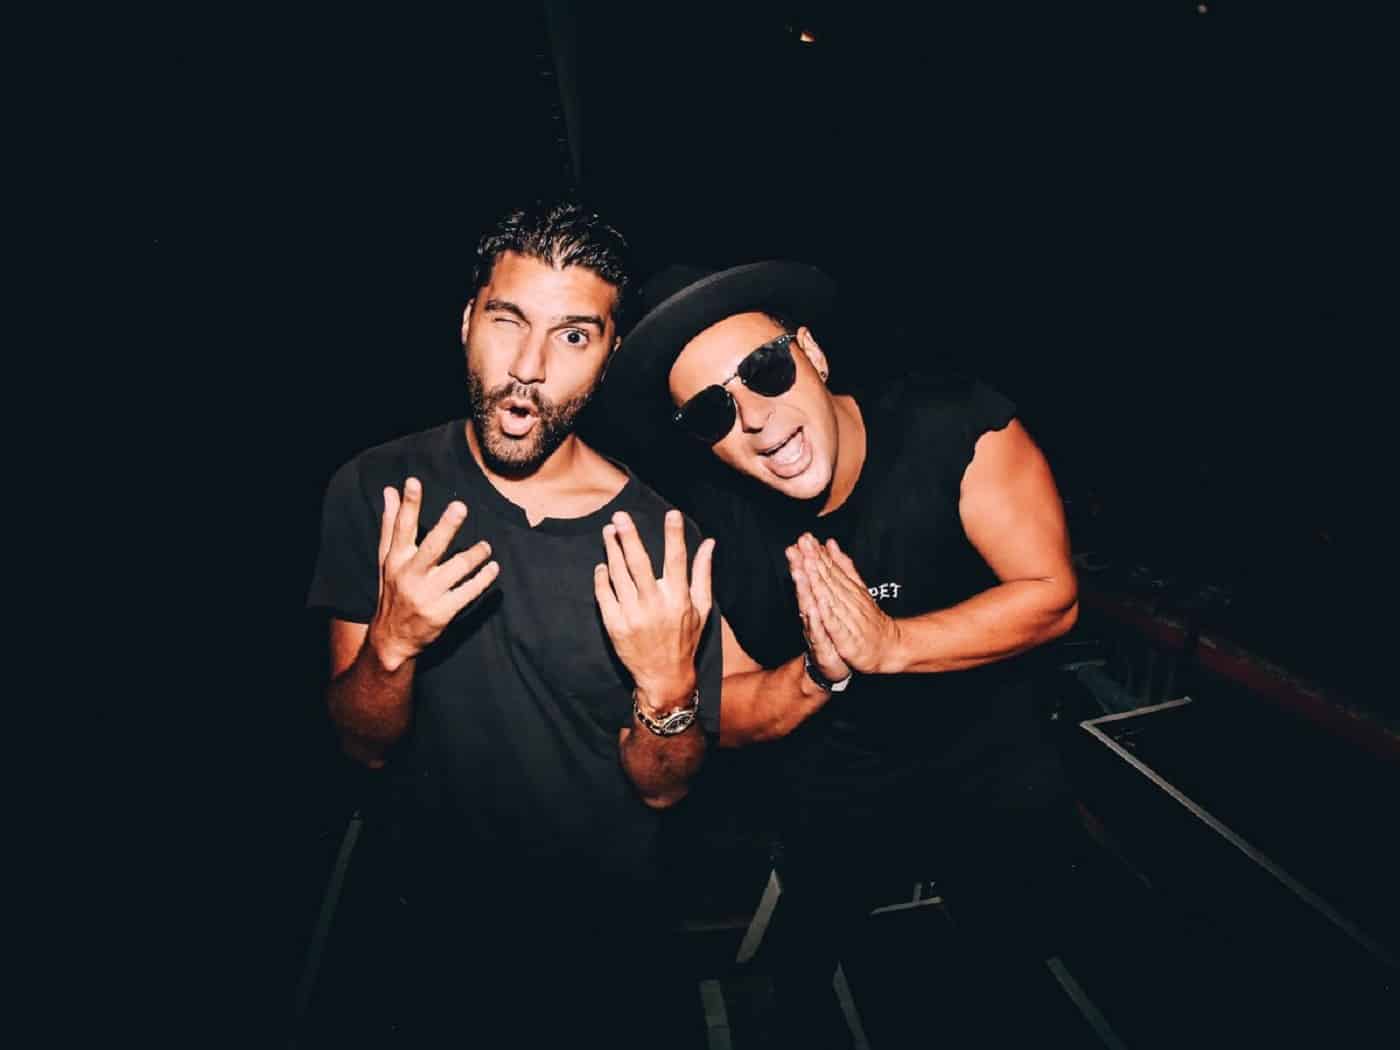 Timmy Trumpet & R3HAB team up with NINEONE# for ‘Turn The Lights Down’: Listen